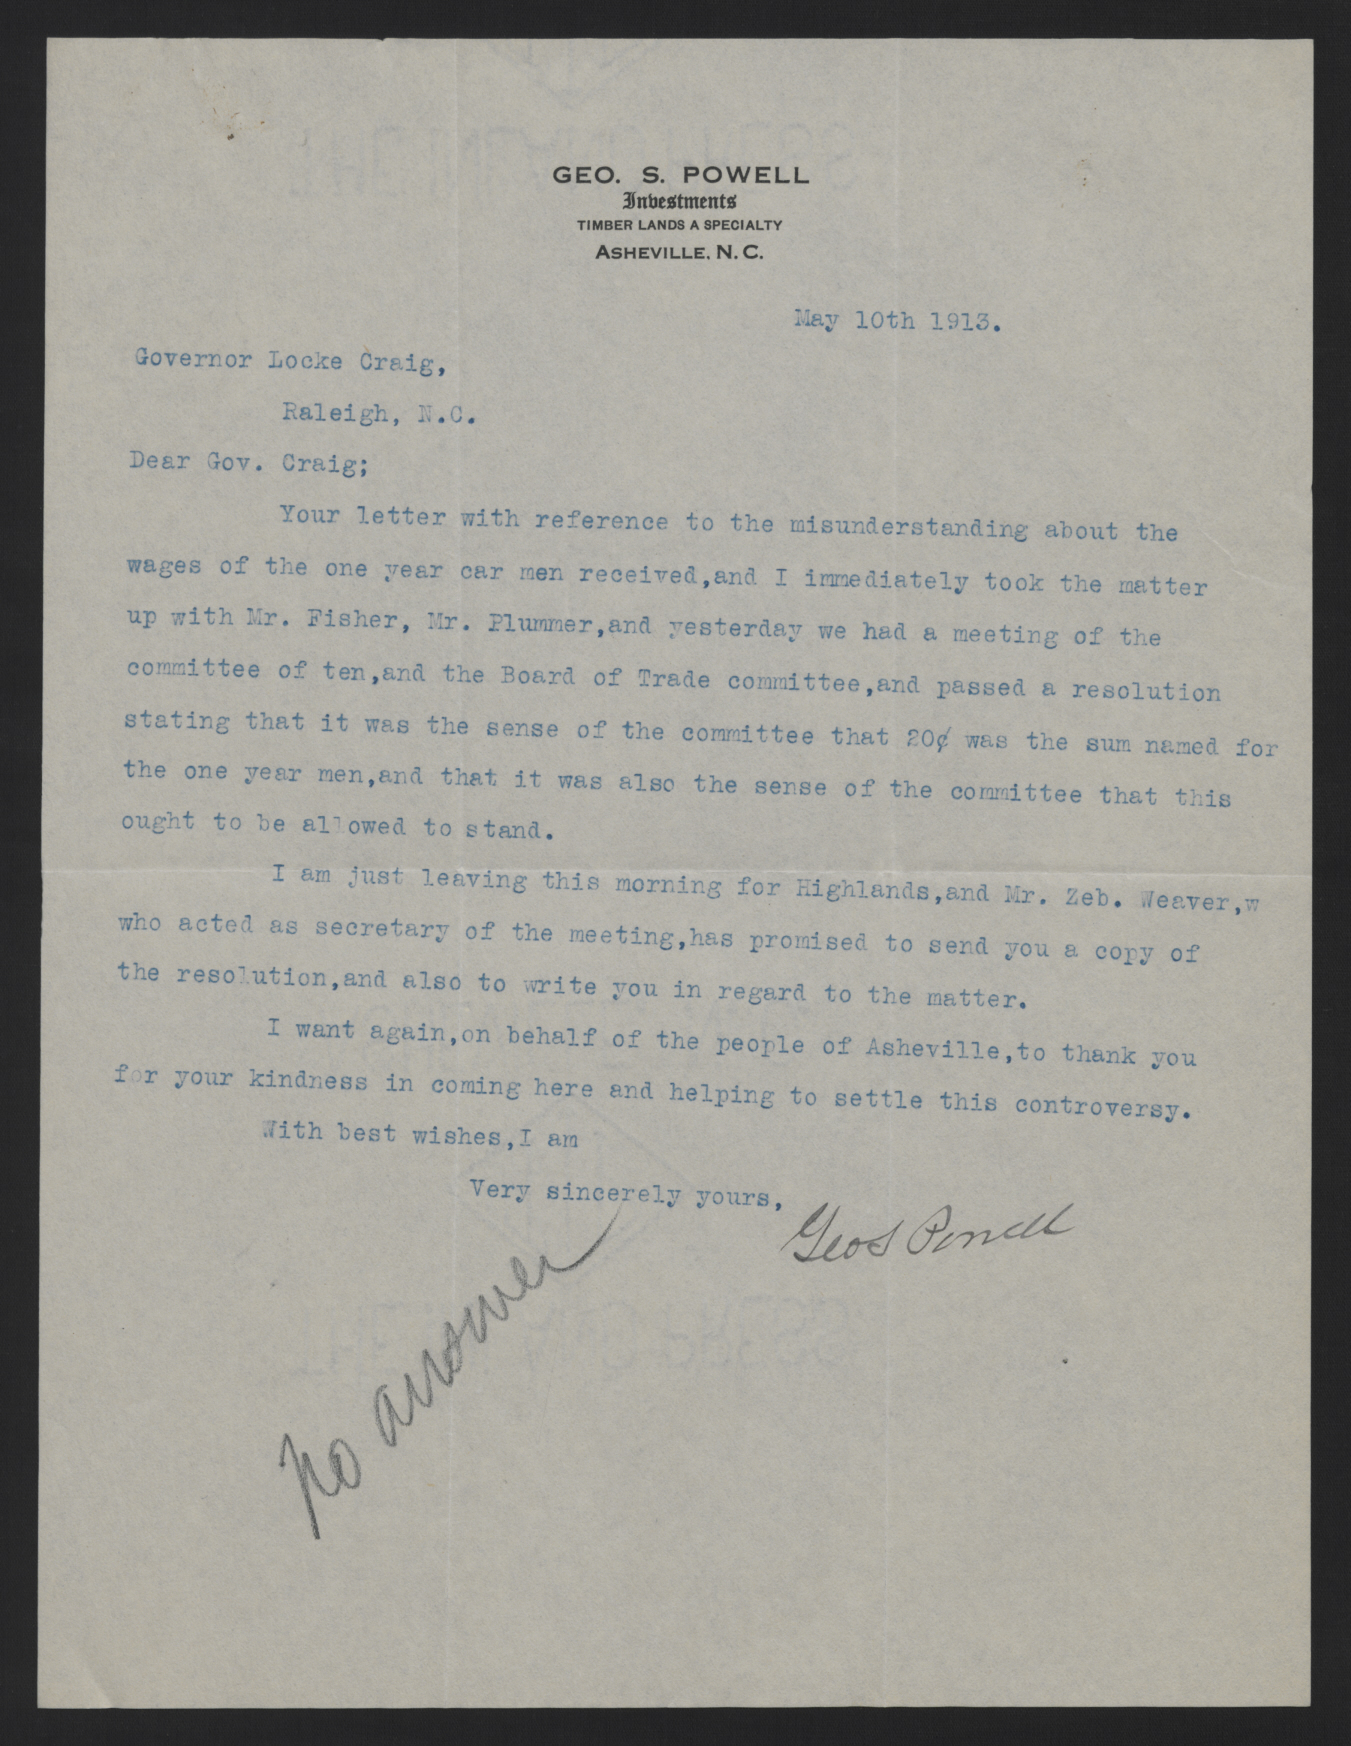 Letter from Powell to Craig, May 10, 1913